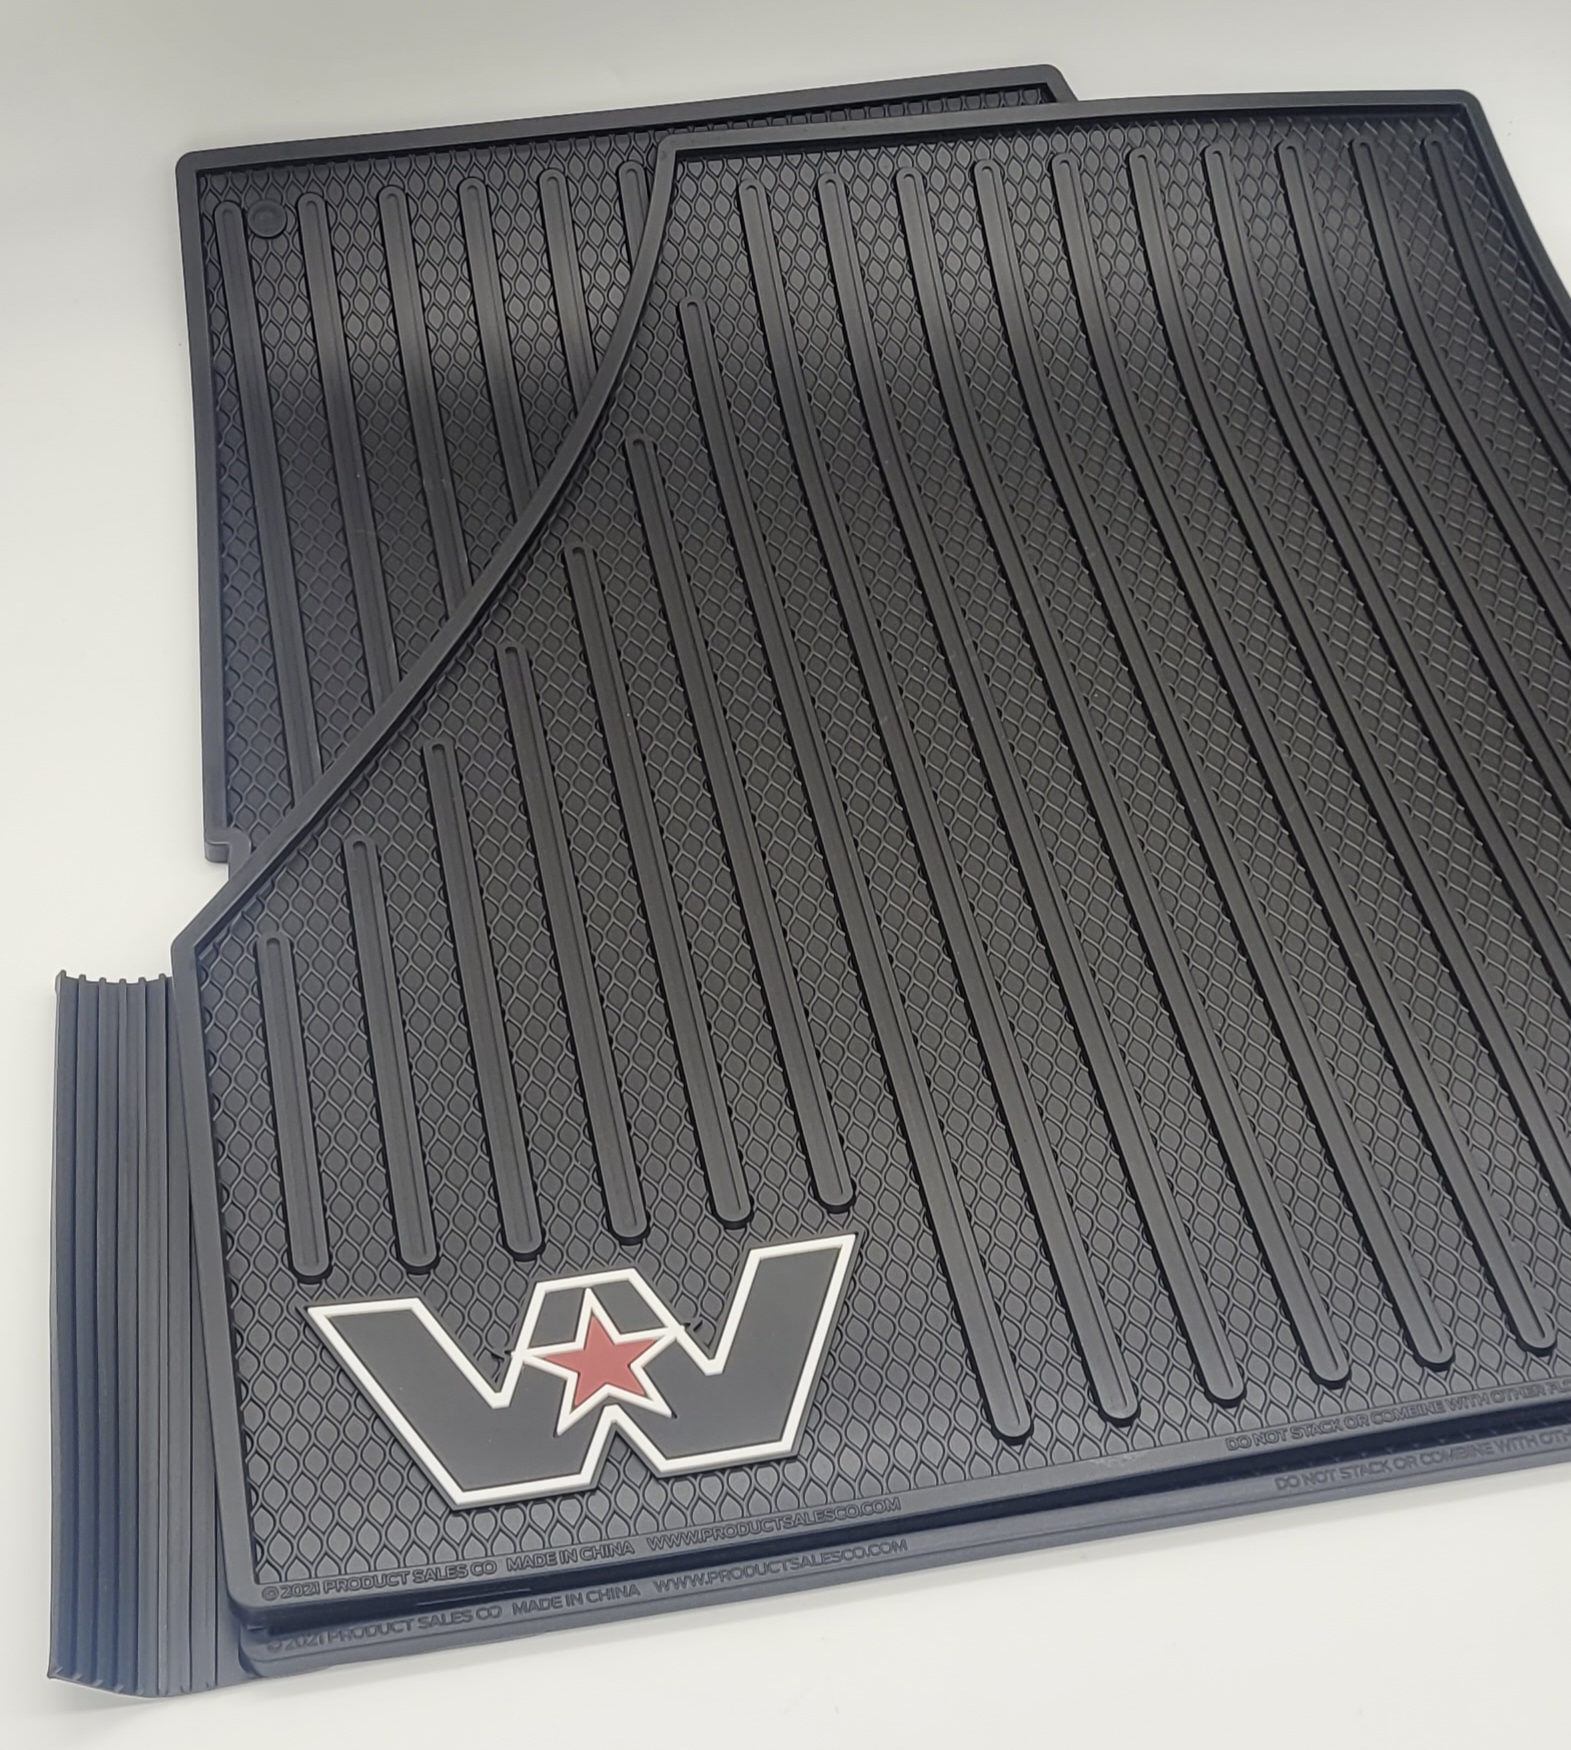 WWS/49XFM NEW FLOOR MAT SET - Hudson County Motors is a heavy truck  dealership in Secaucus, NJ with a parts store, rental, service and financing